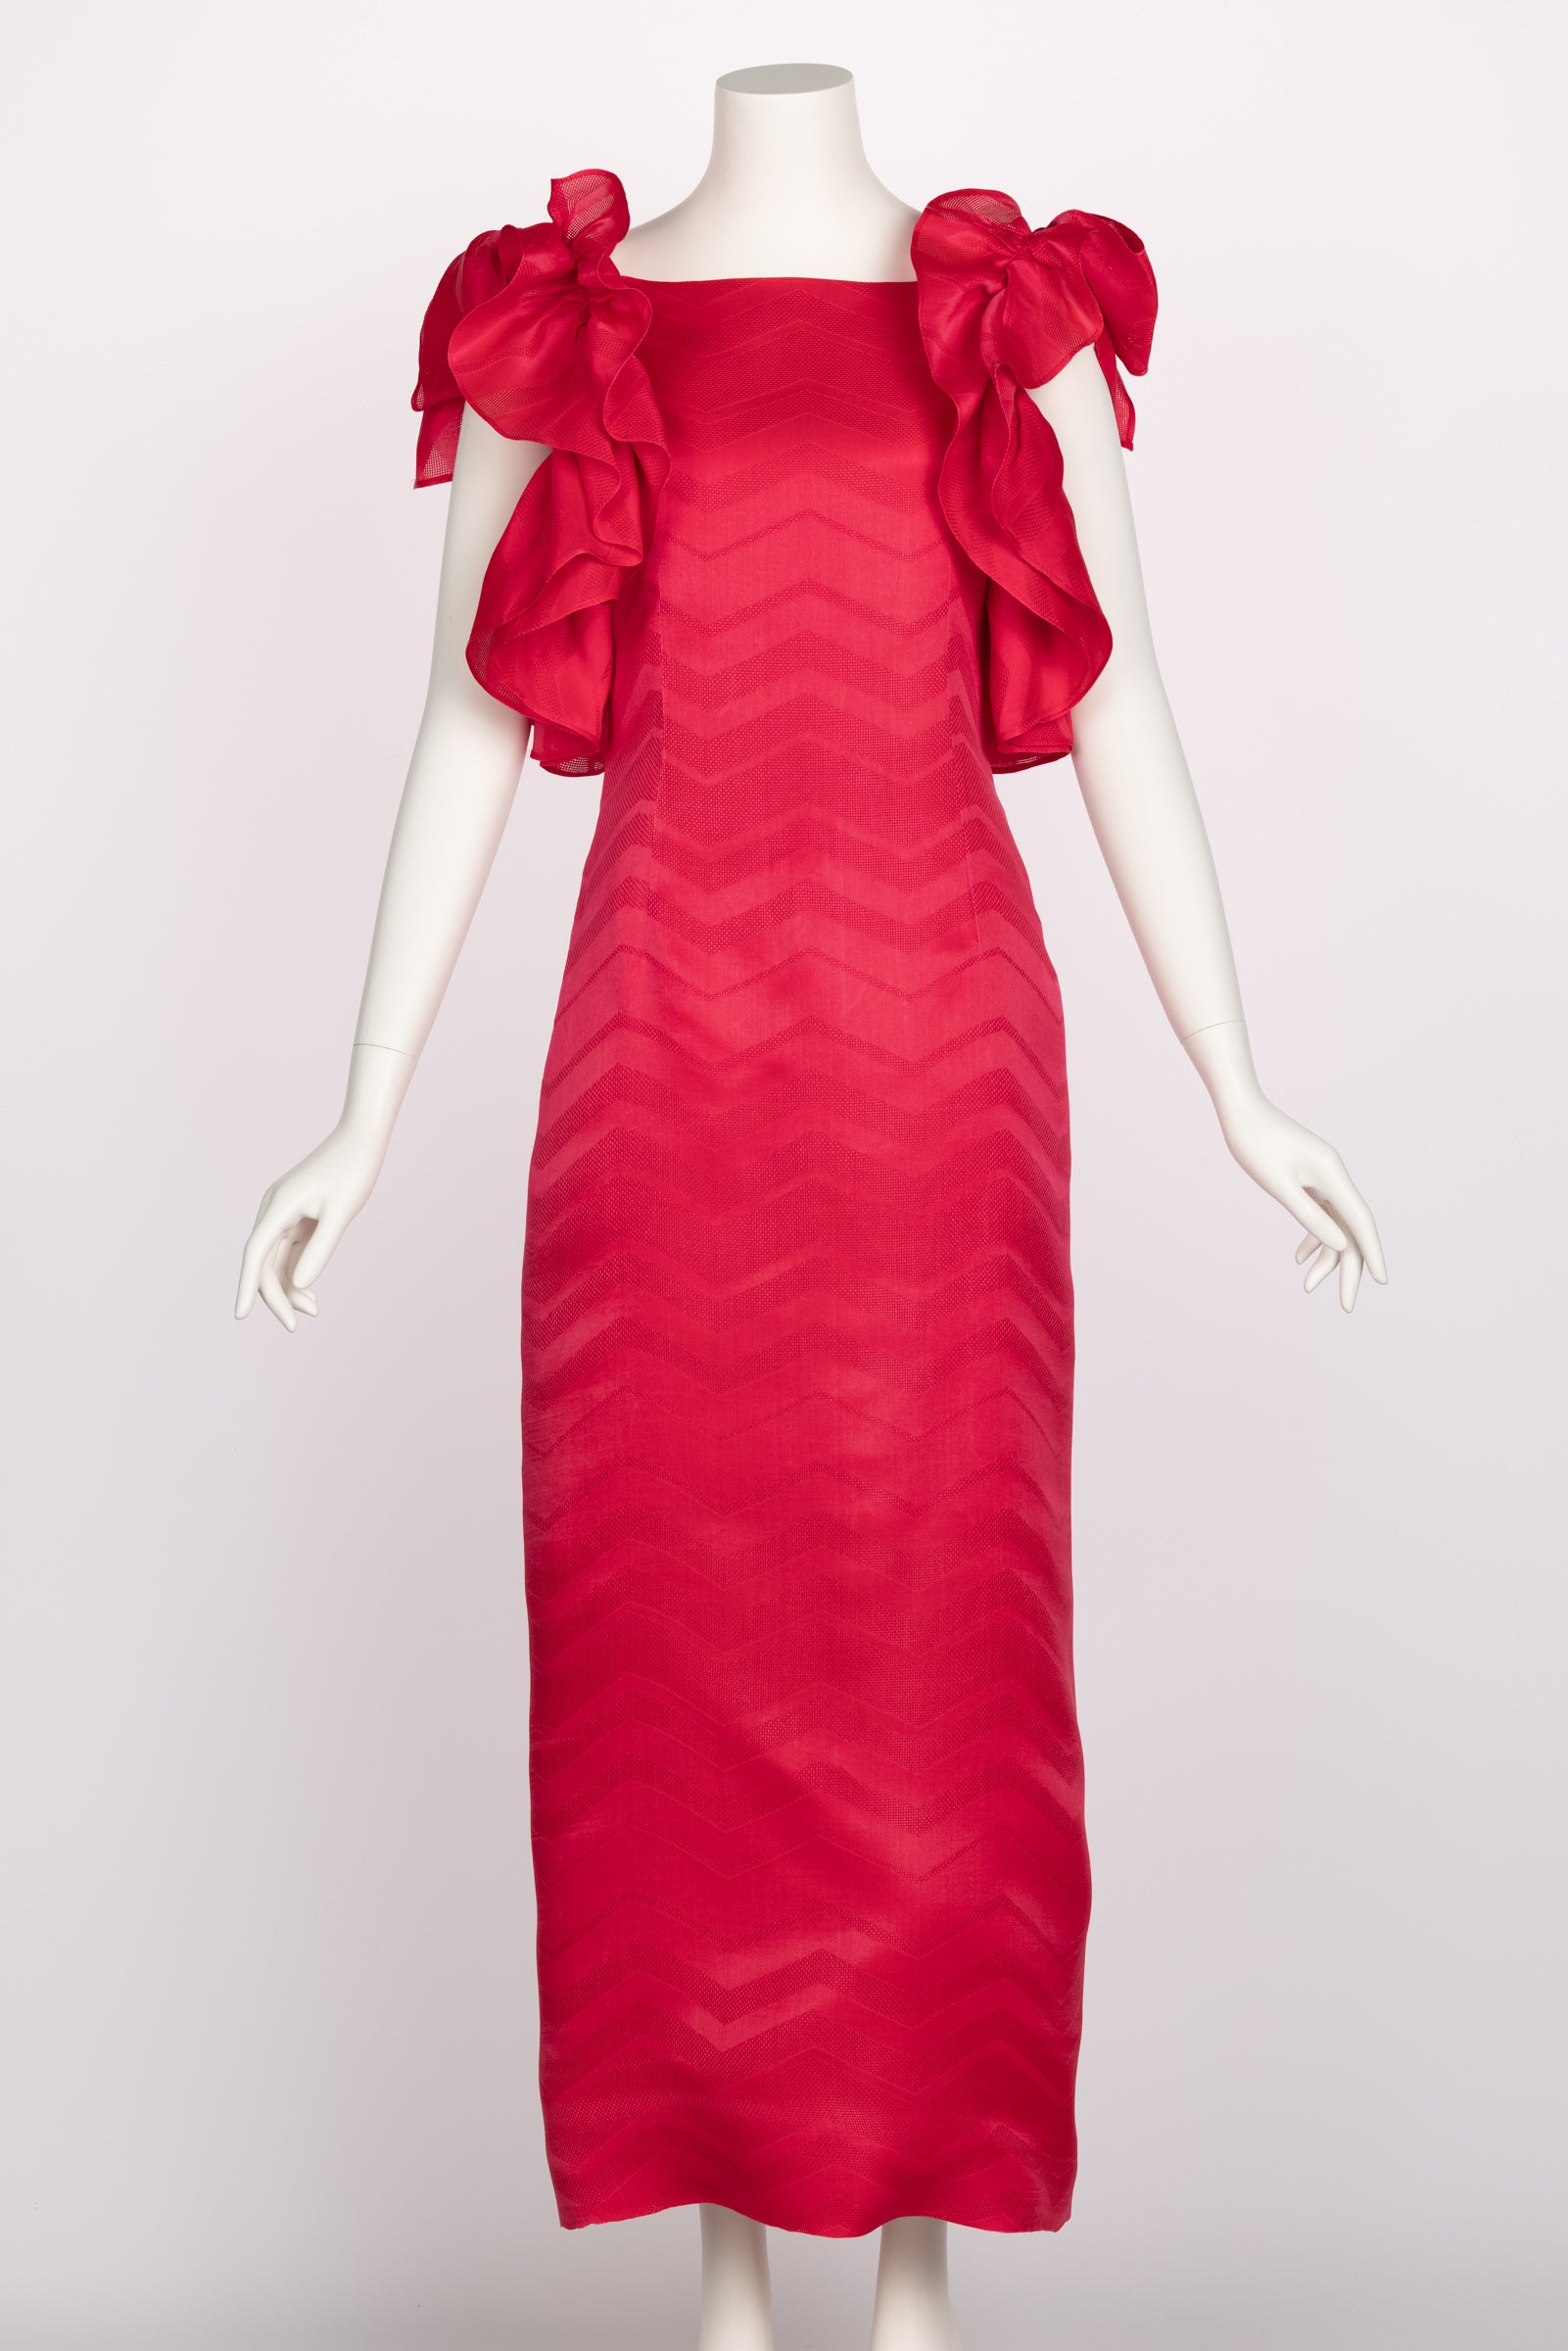 Vintage Givenchy Couture Magenta Silk Chevron Sleeveless Ruffle Bow Dress In Good Condition For Sale In Boca Raton, FL